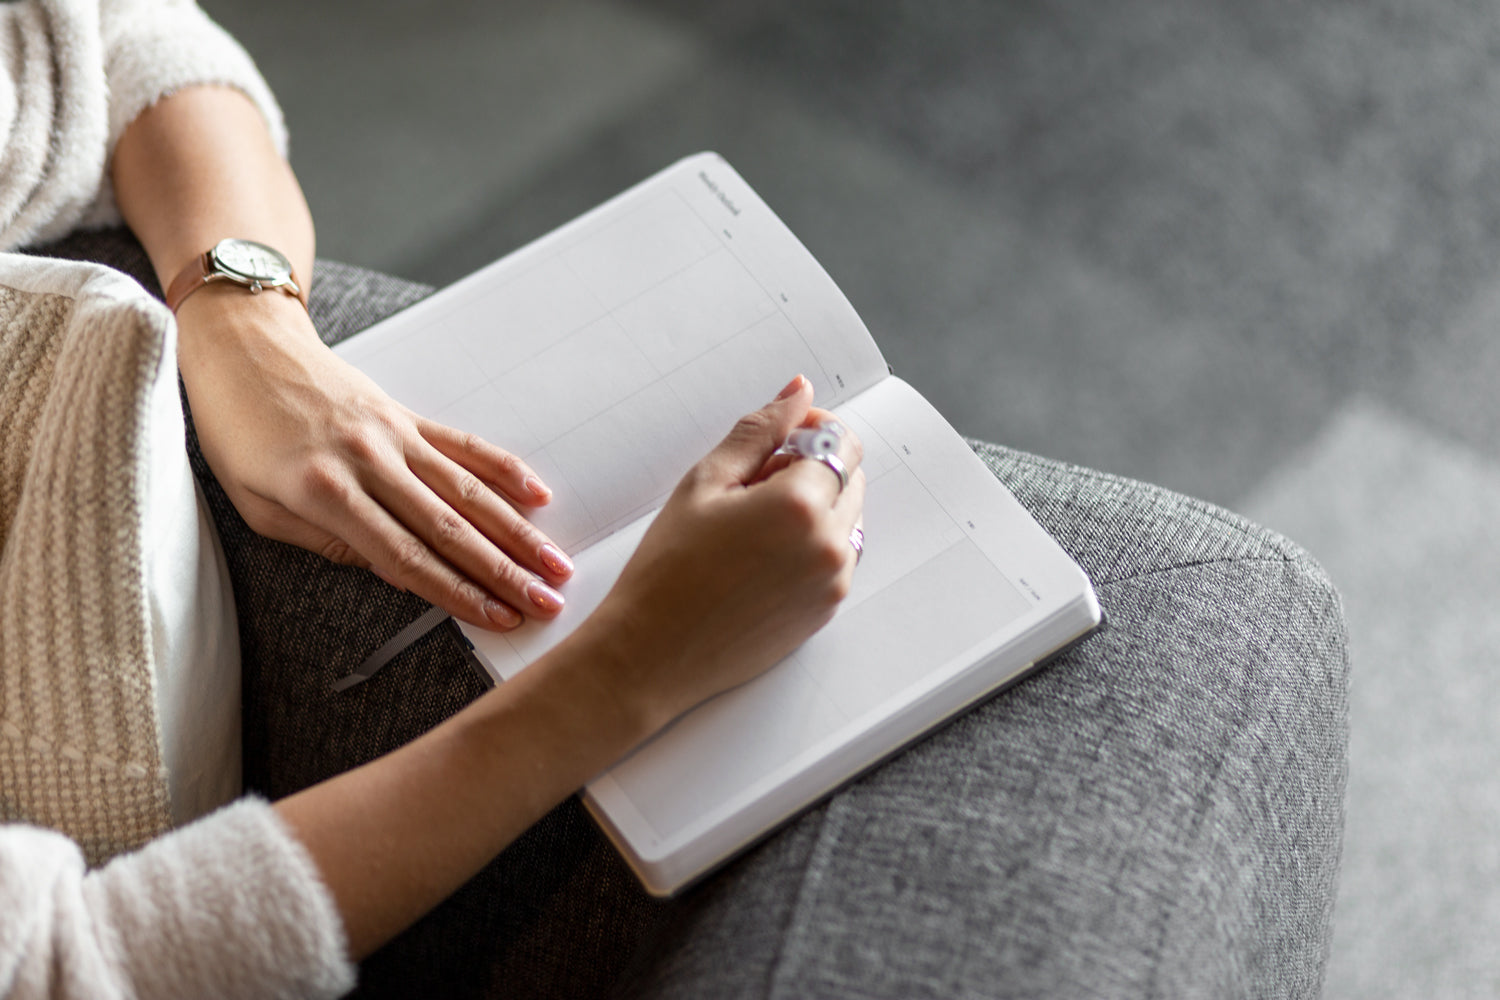 A woman sitting on a grey couch writes in a planner with a pen.